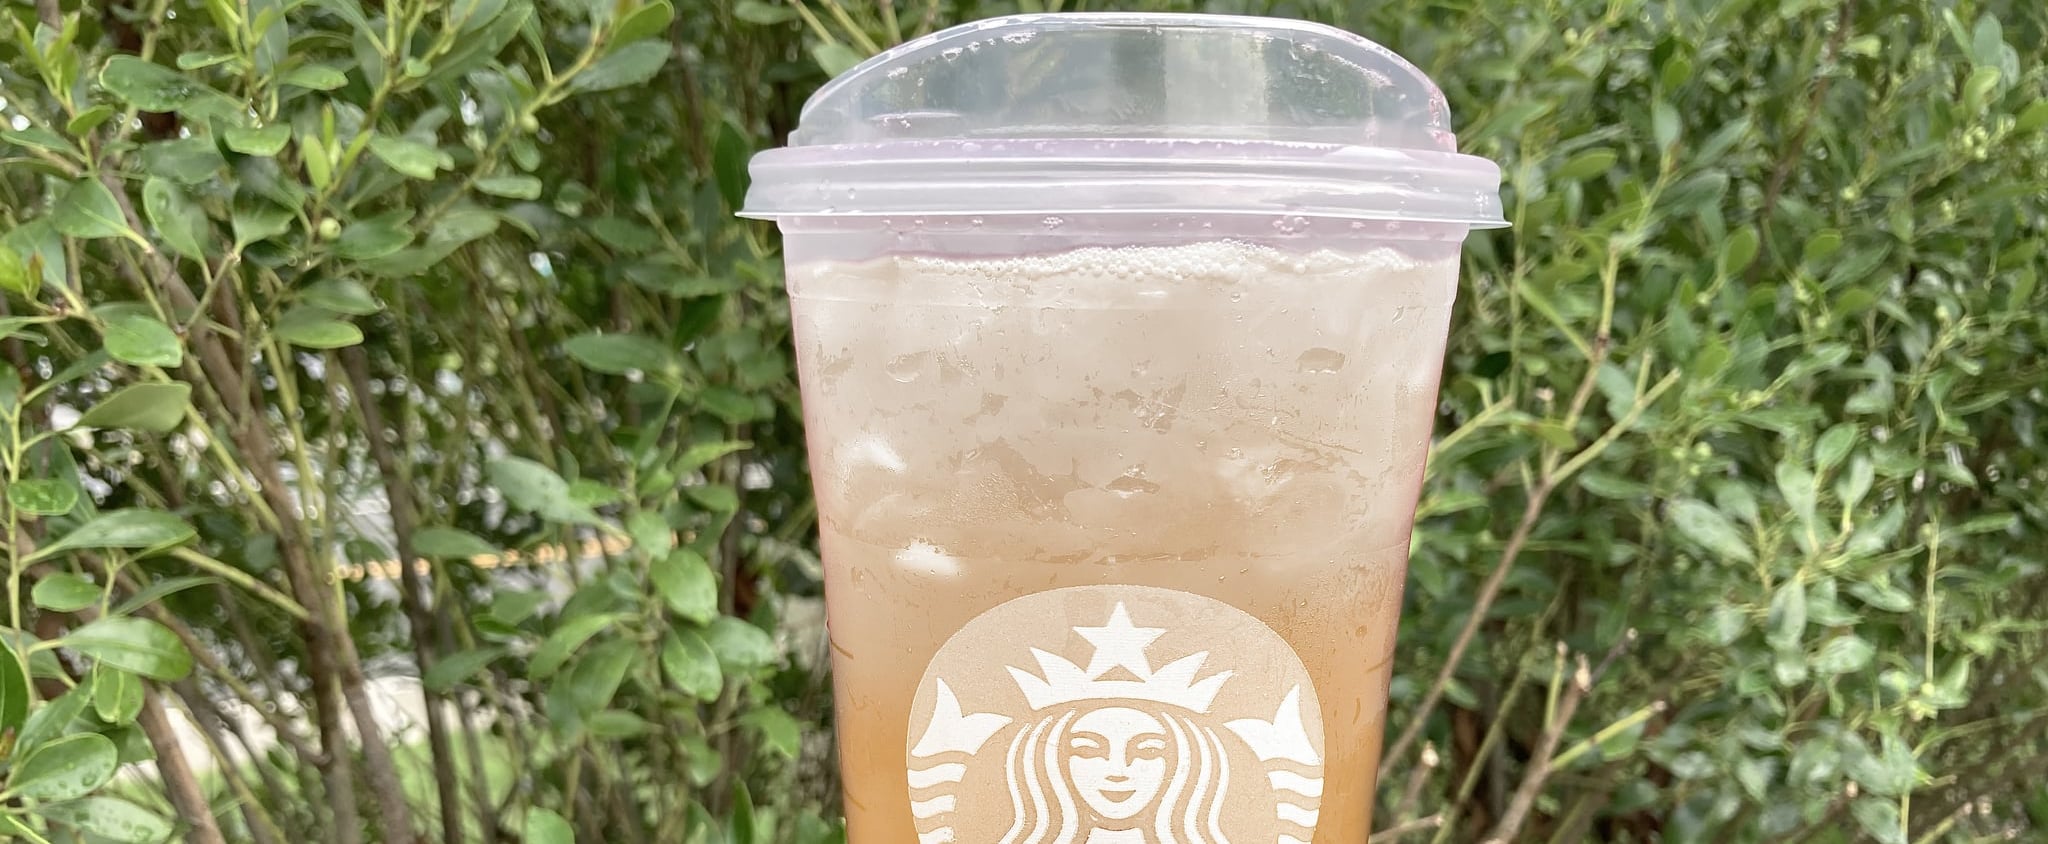 This Rose Gold Refresher From Starbucks Will Have You Feeling Fancy